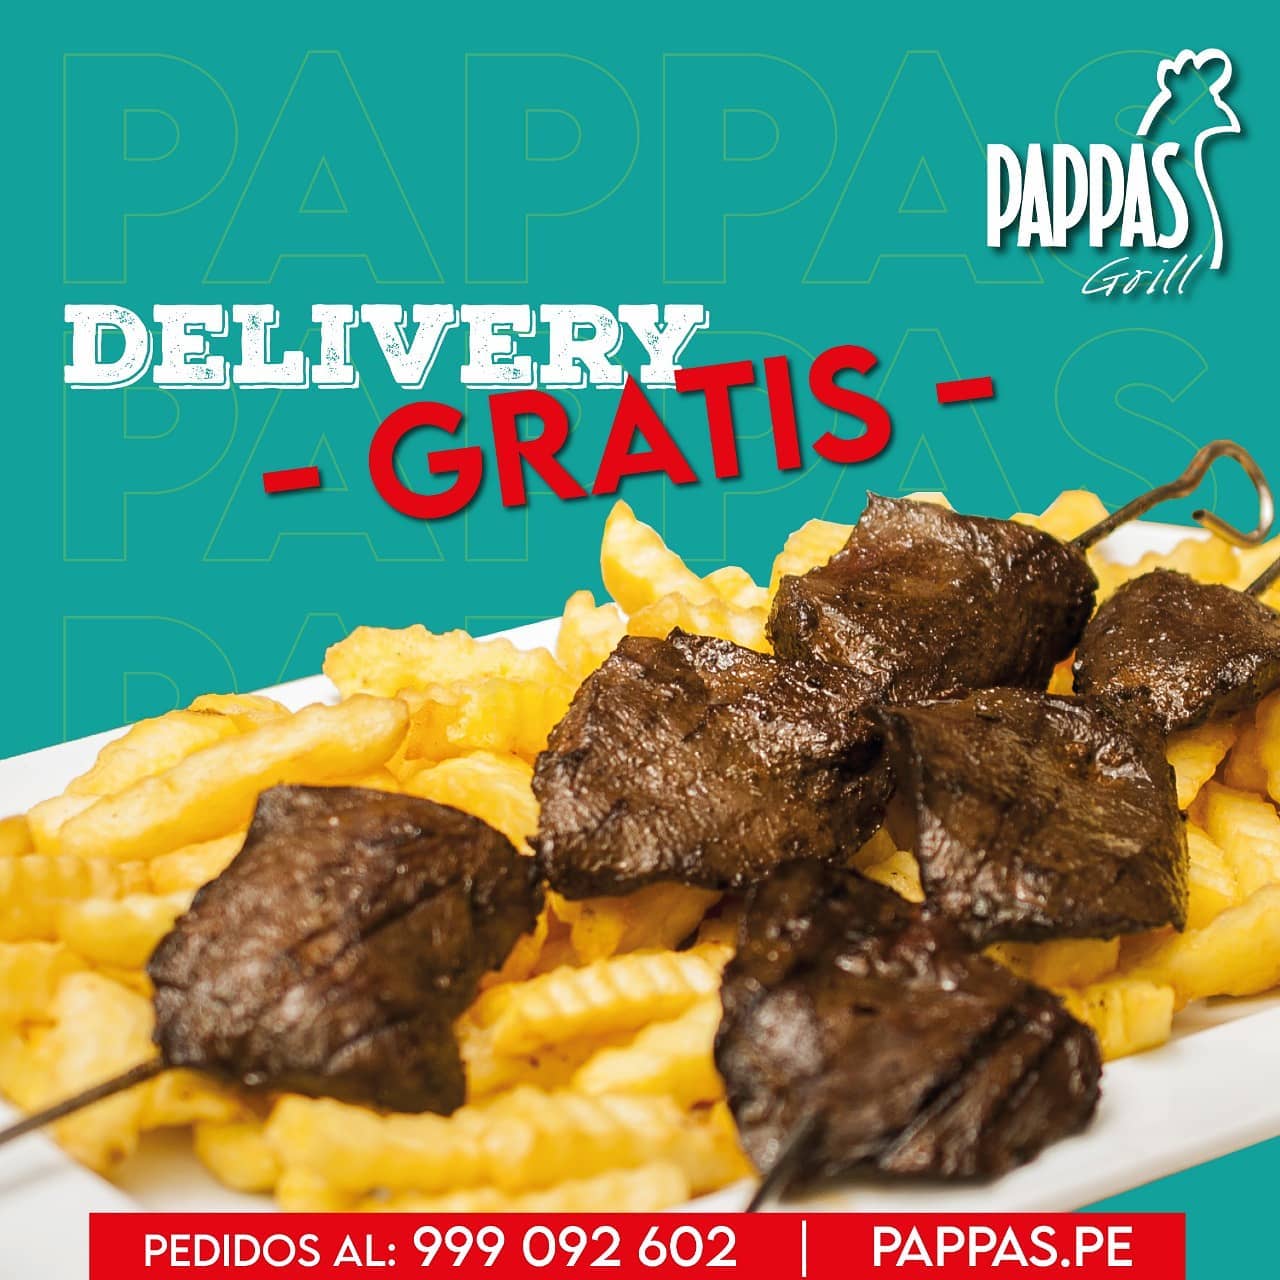 Pappas grill